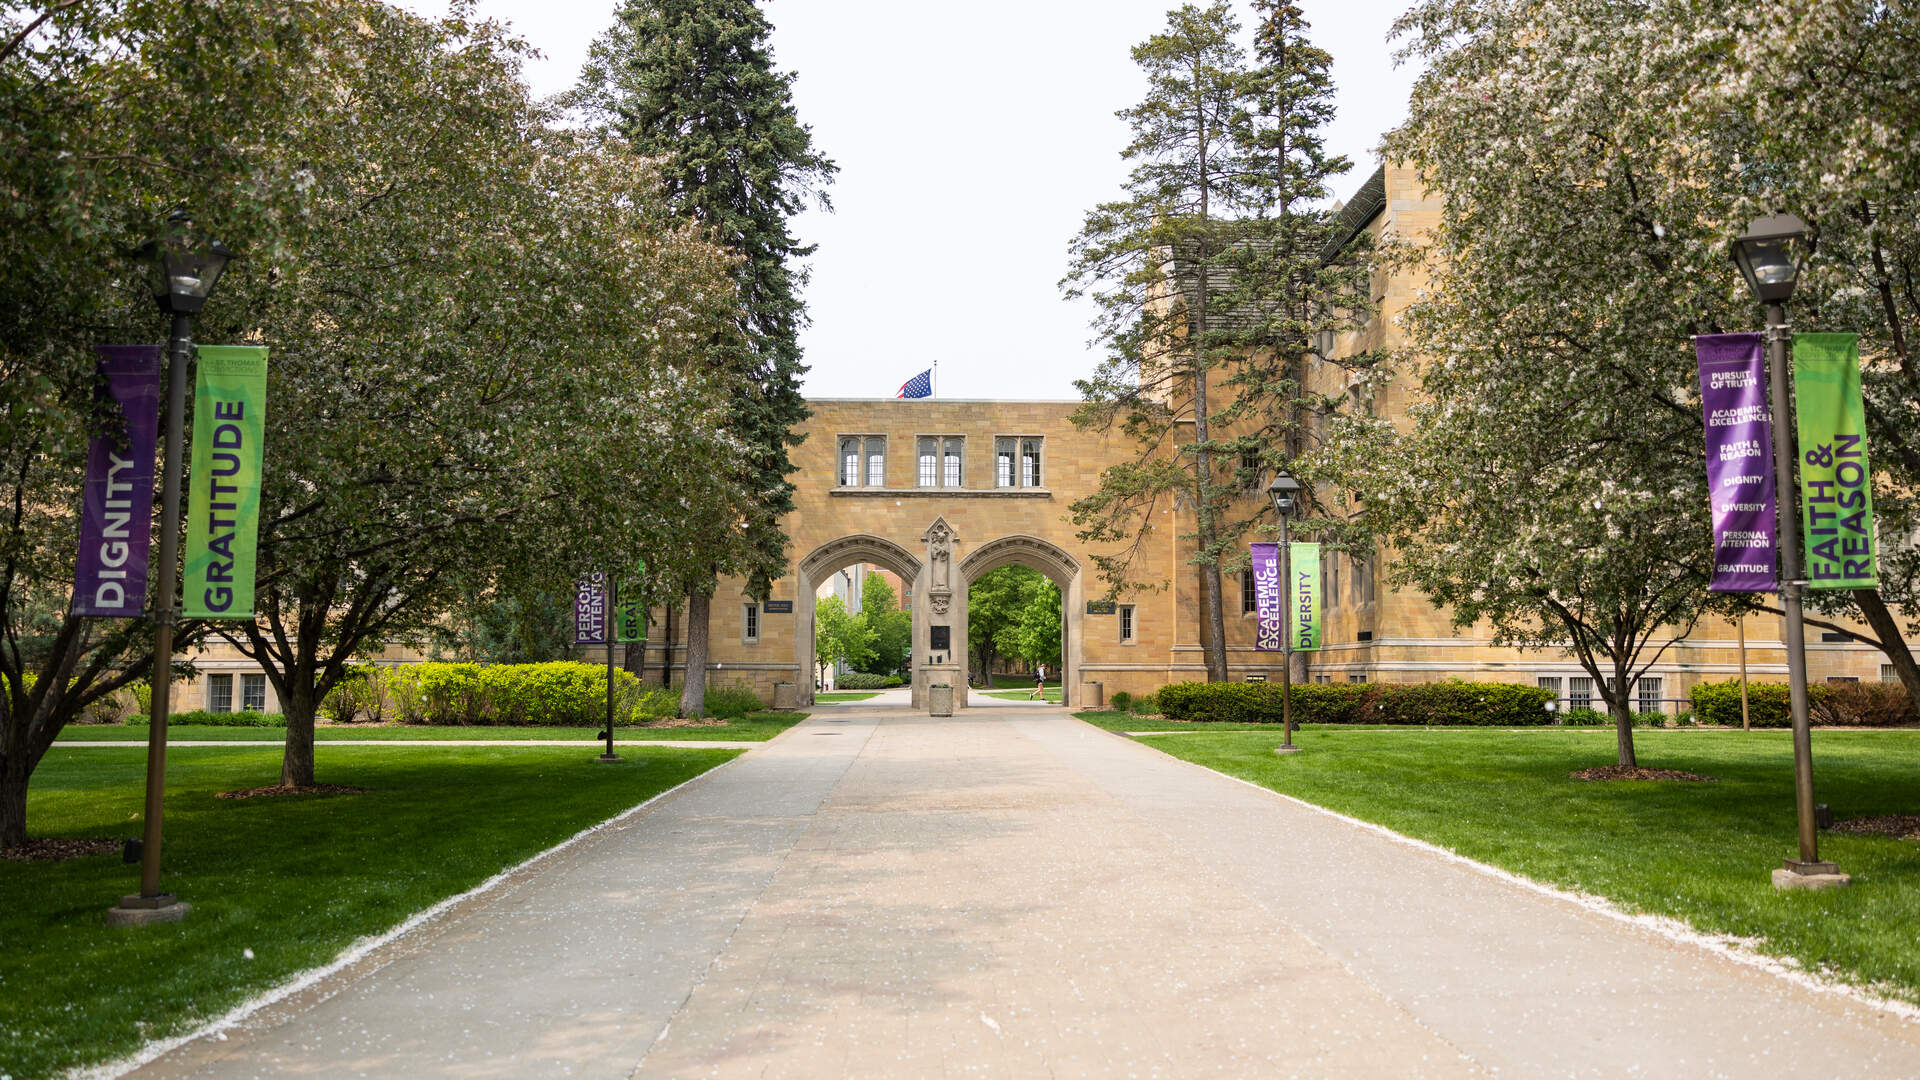 A view of the arches on campus